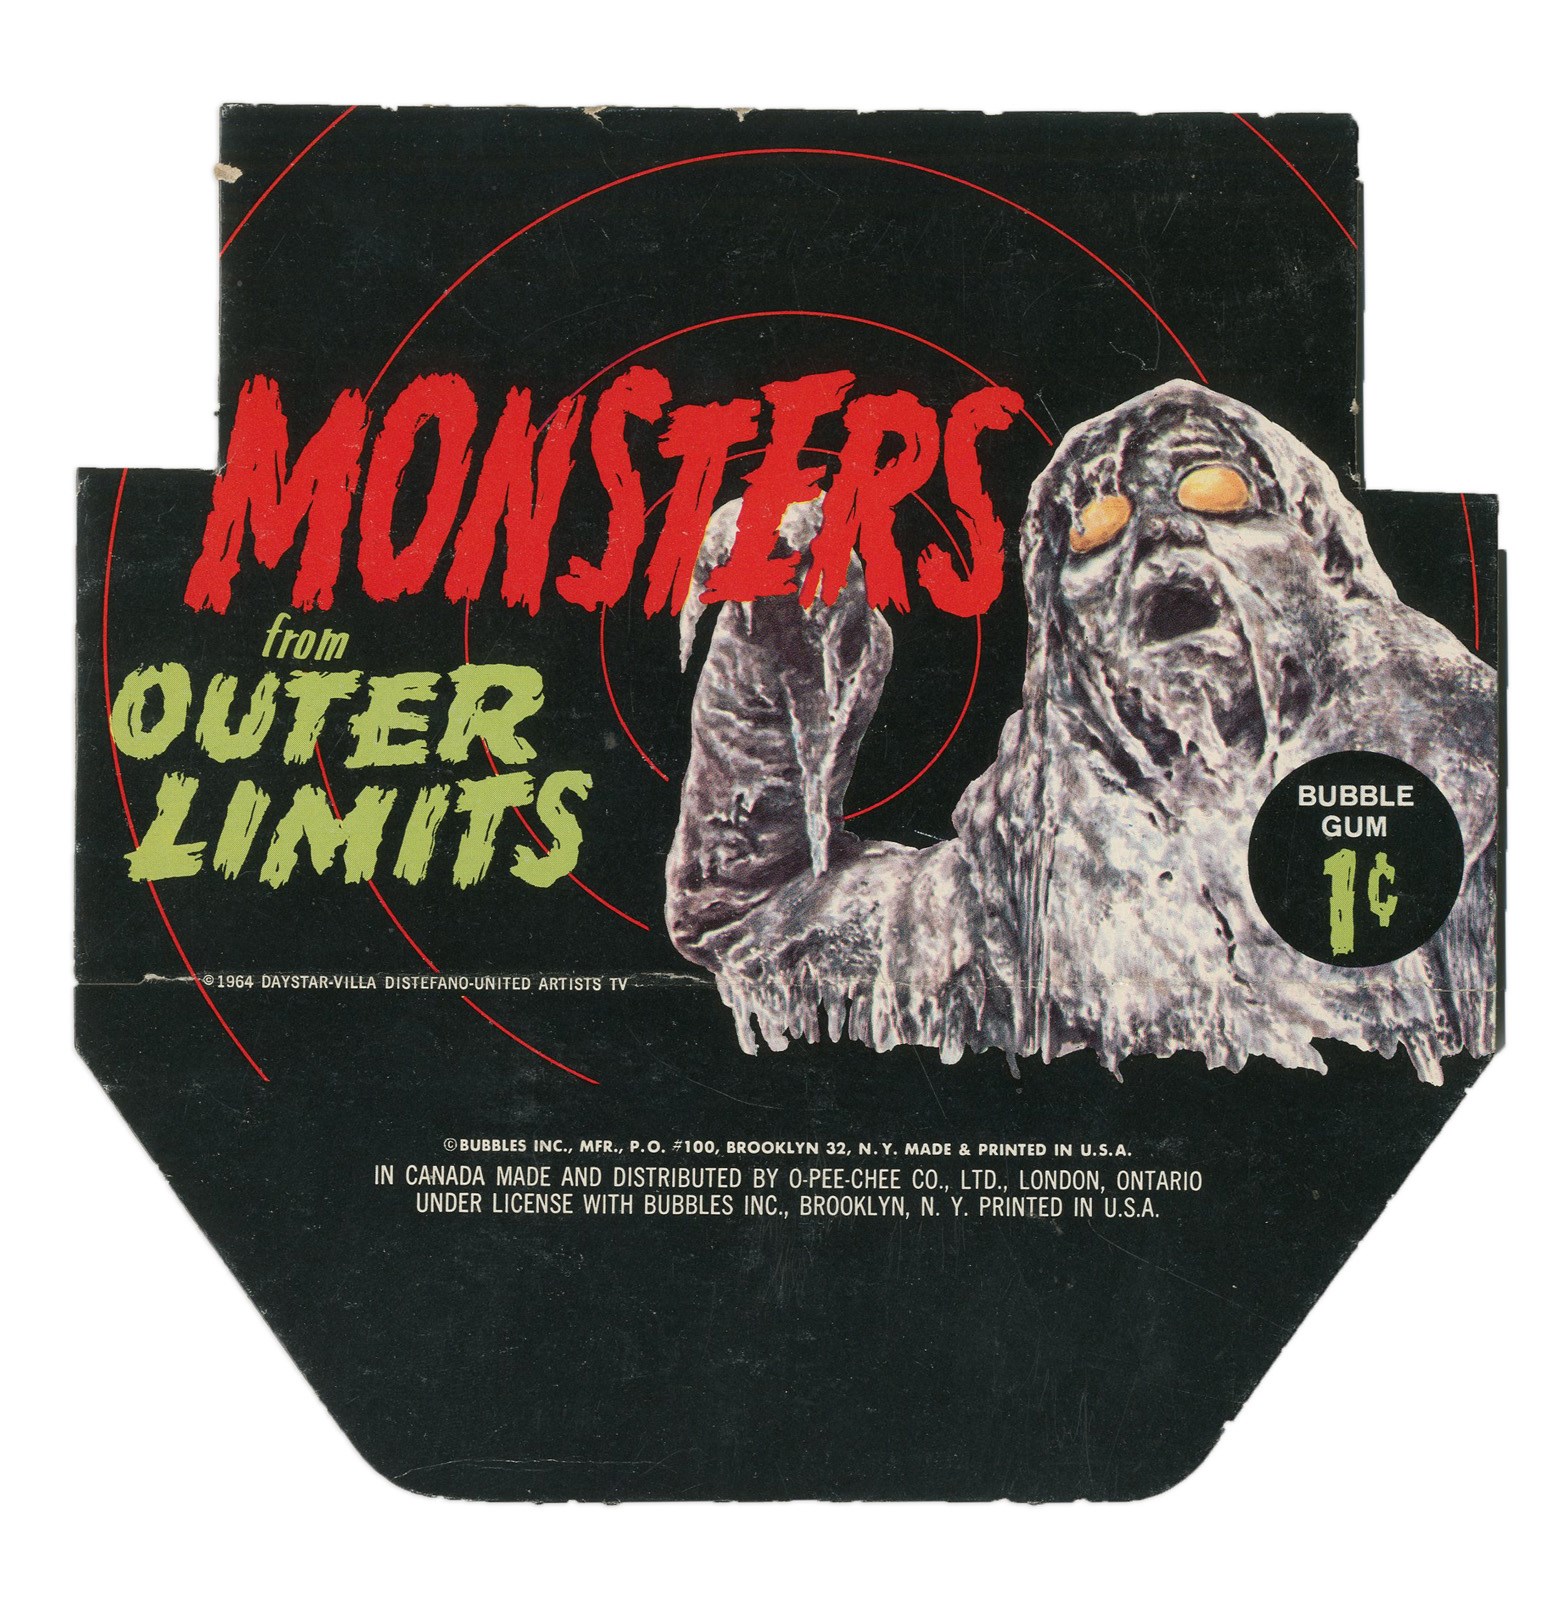 Baseball and Trading Cards - 1964 Topps Outer Limits Display Box Top - Original File Copy!